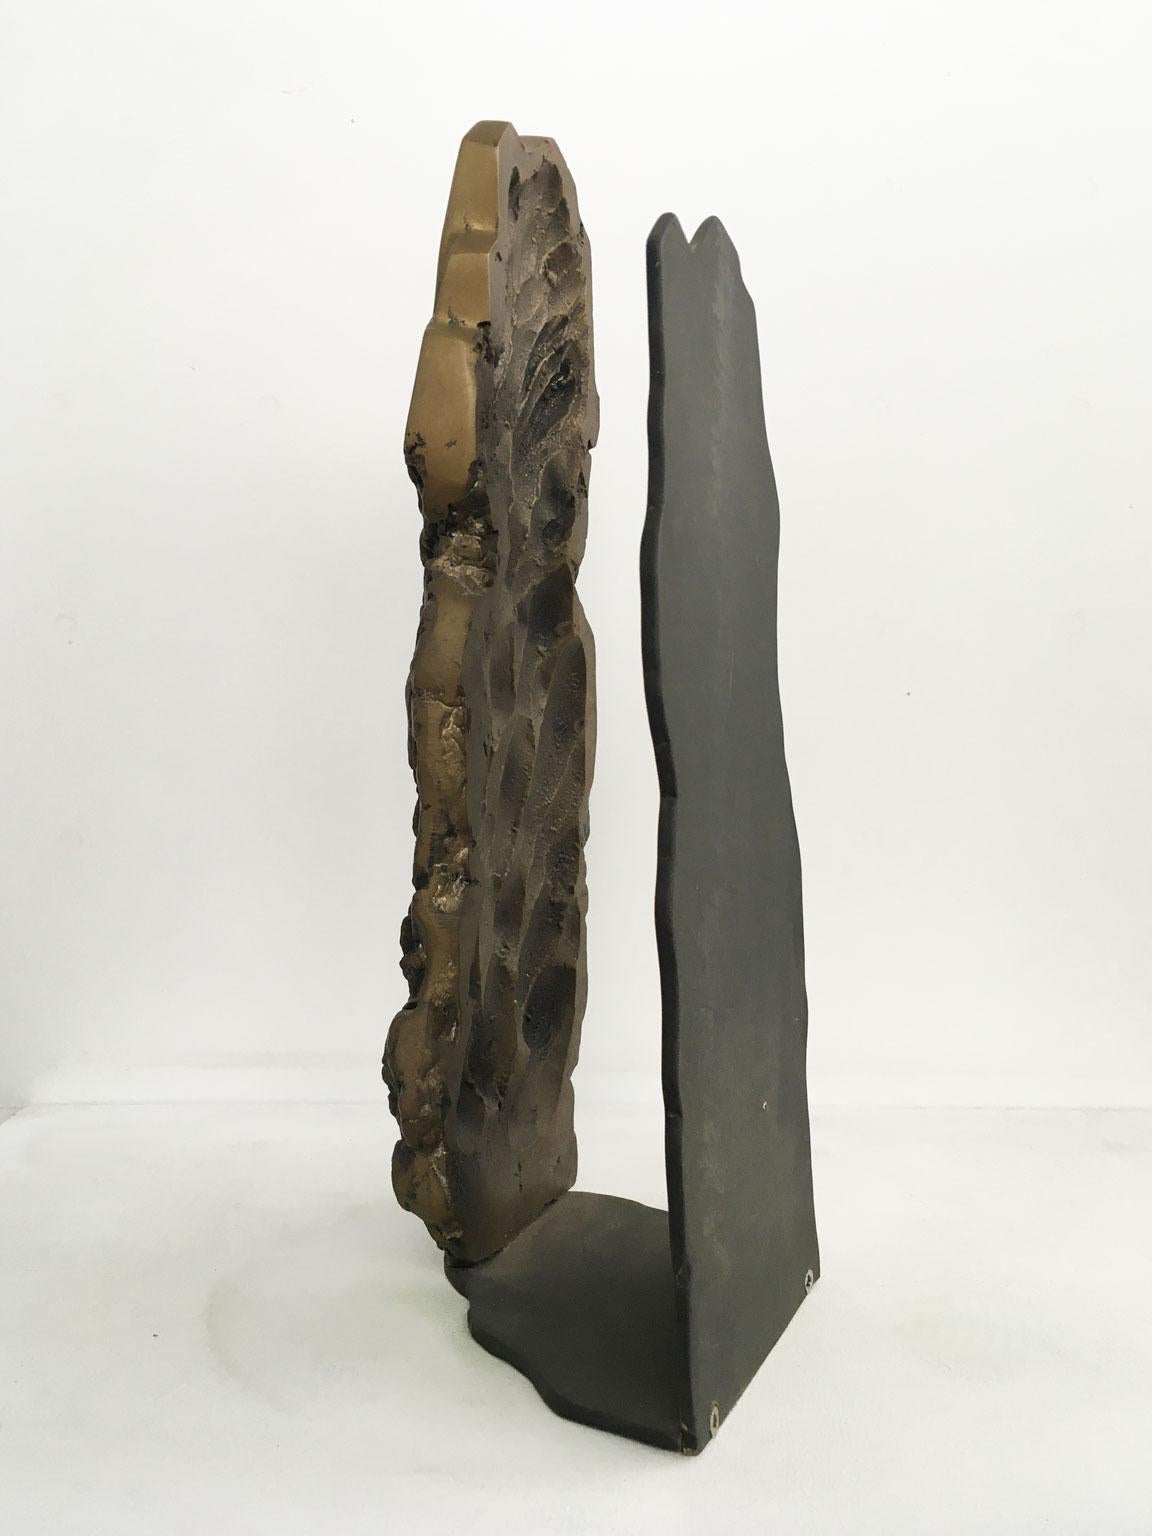 1979 Italy Post-Modern Graziano Pompili Abstract Bronze Sculpture For Sale 7